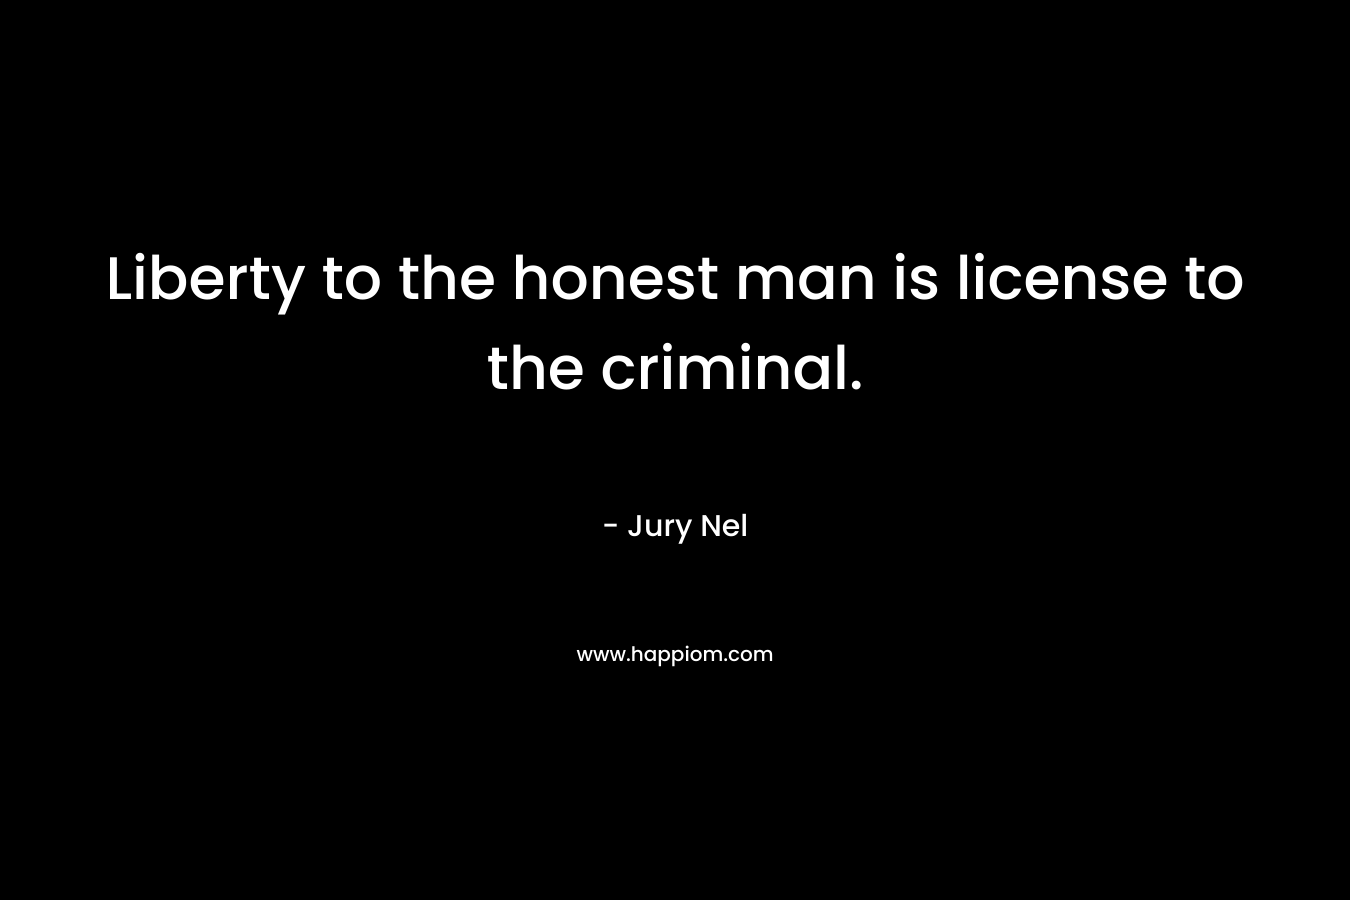 Liberty to the honest man is license to the criminal.